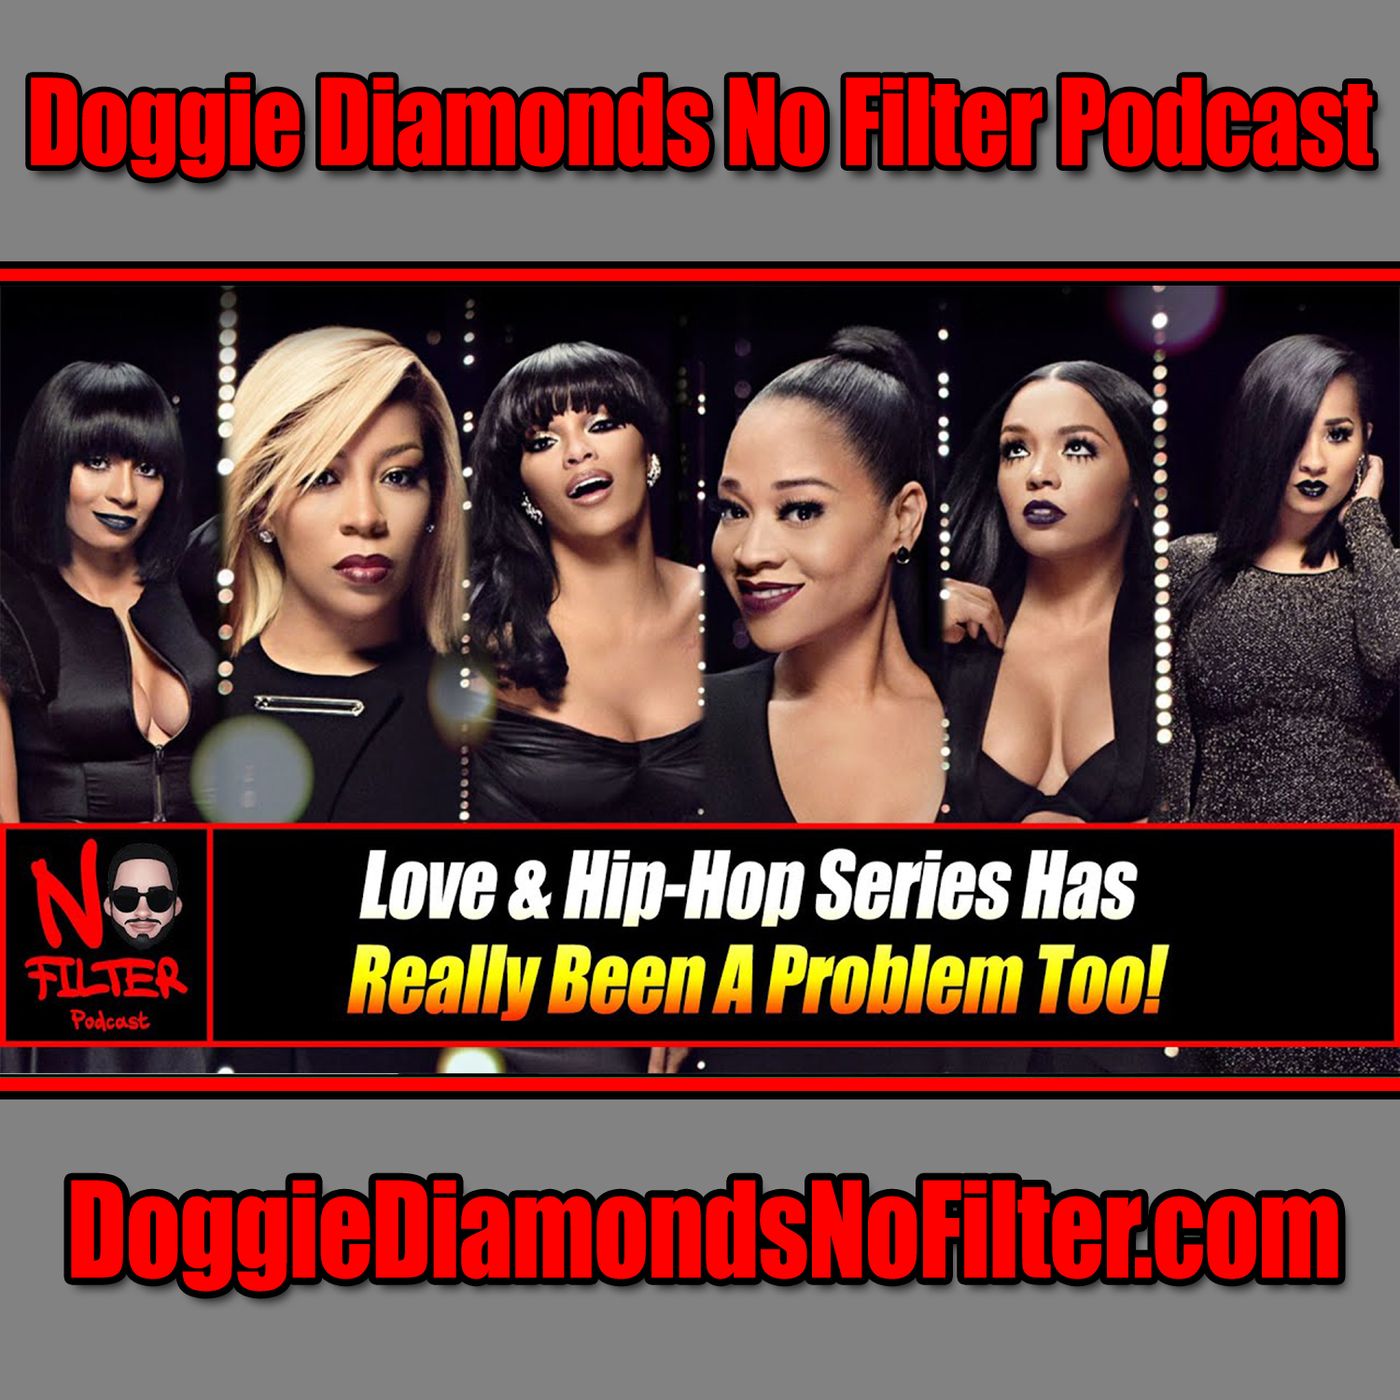 Love & Hip-Hop Series Has Really Been A Problem Too!